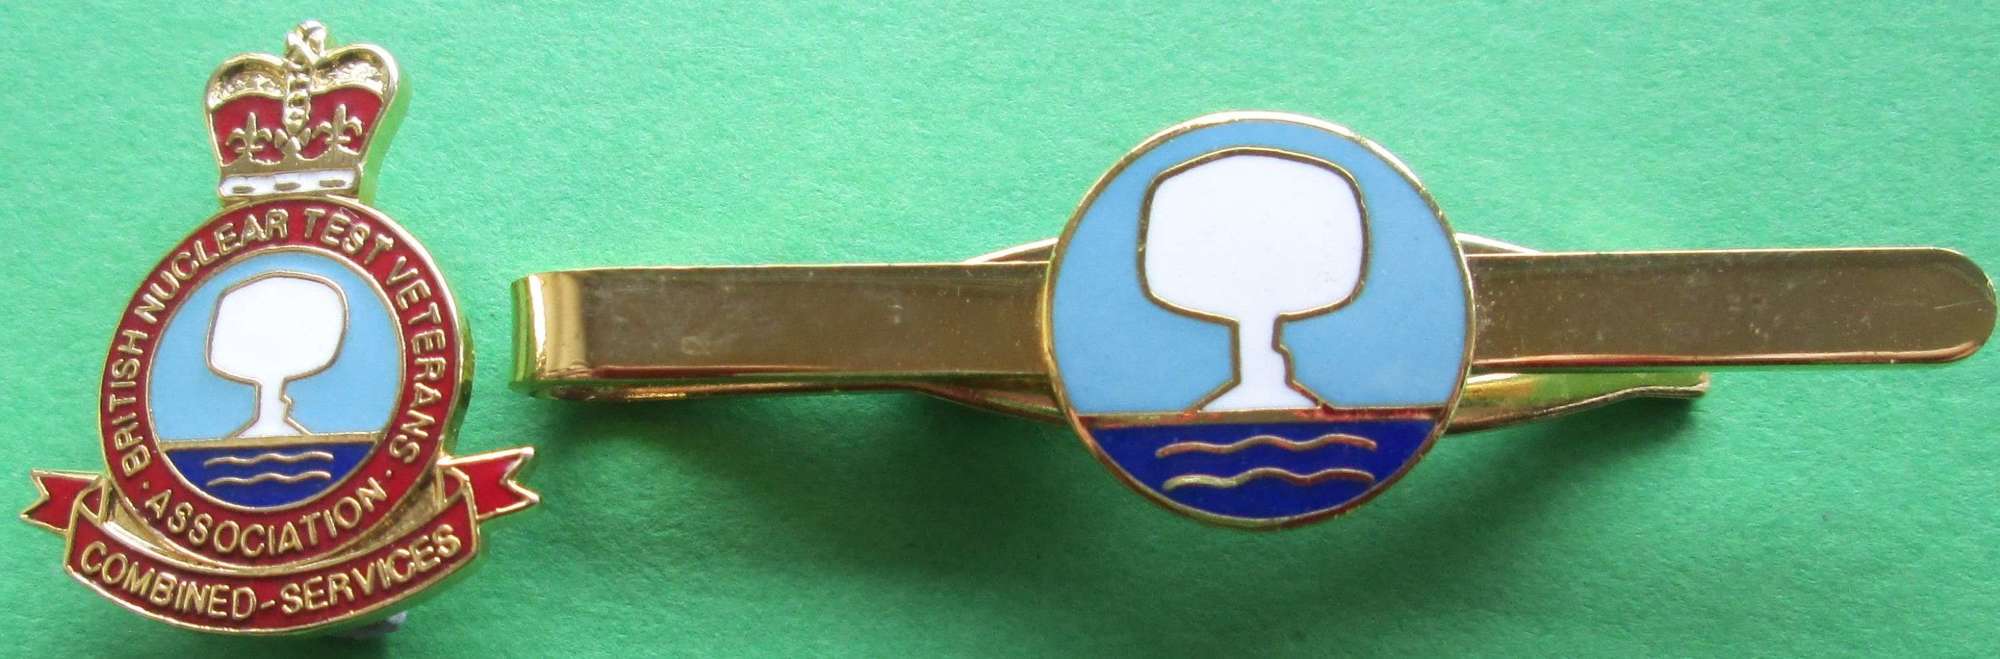 BRITISH NUCLEAR TEST VETERANS ASSOCIATION PIN BADGE AND TIE PIN